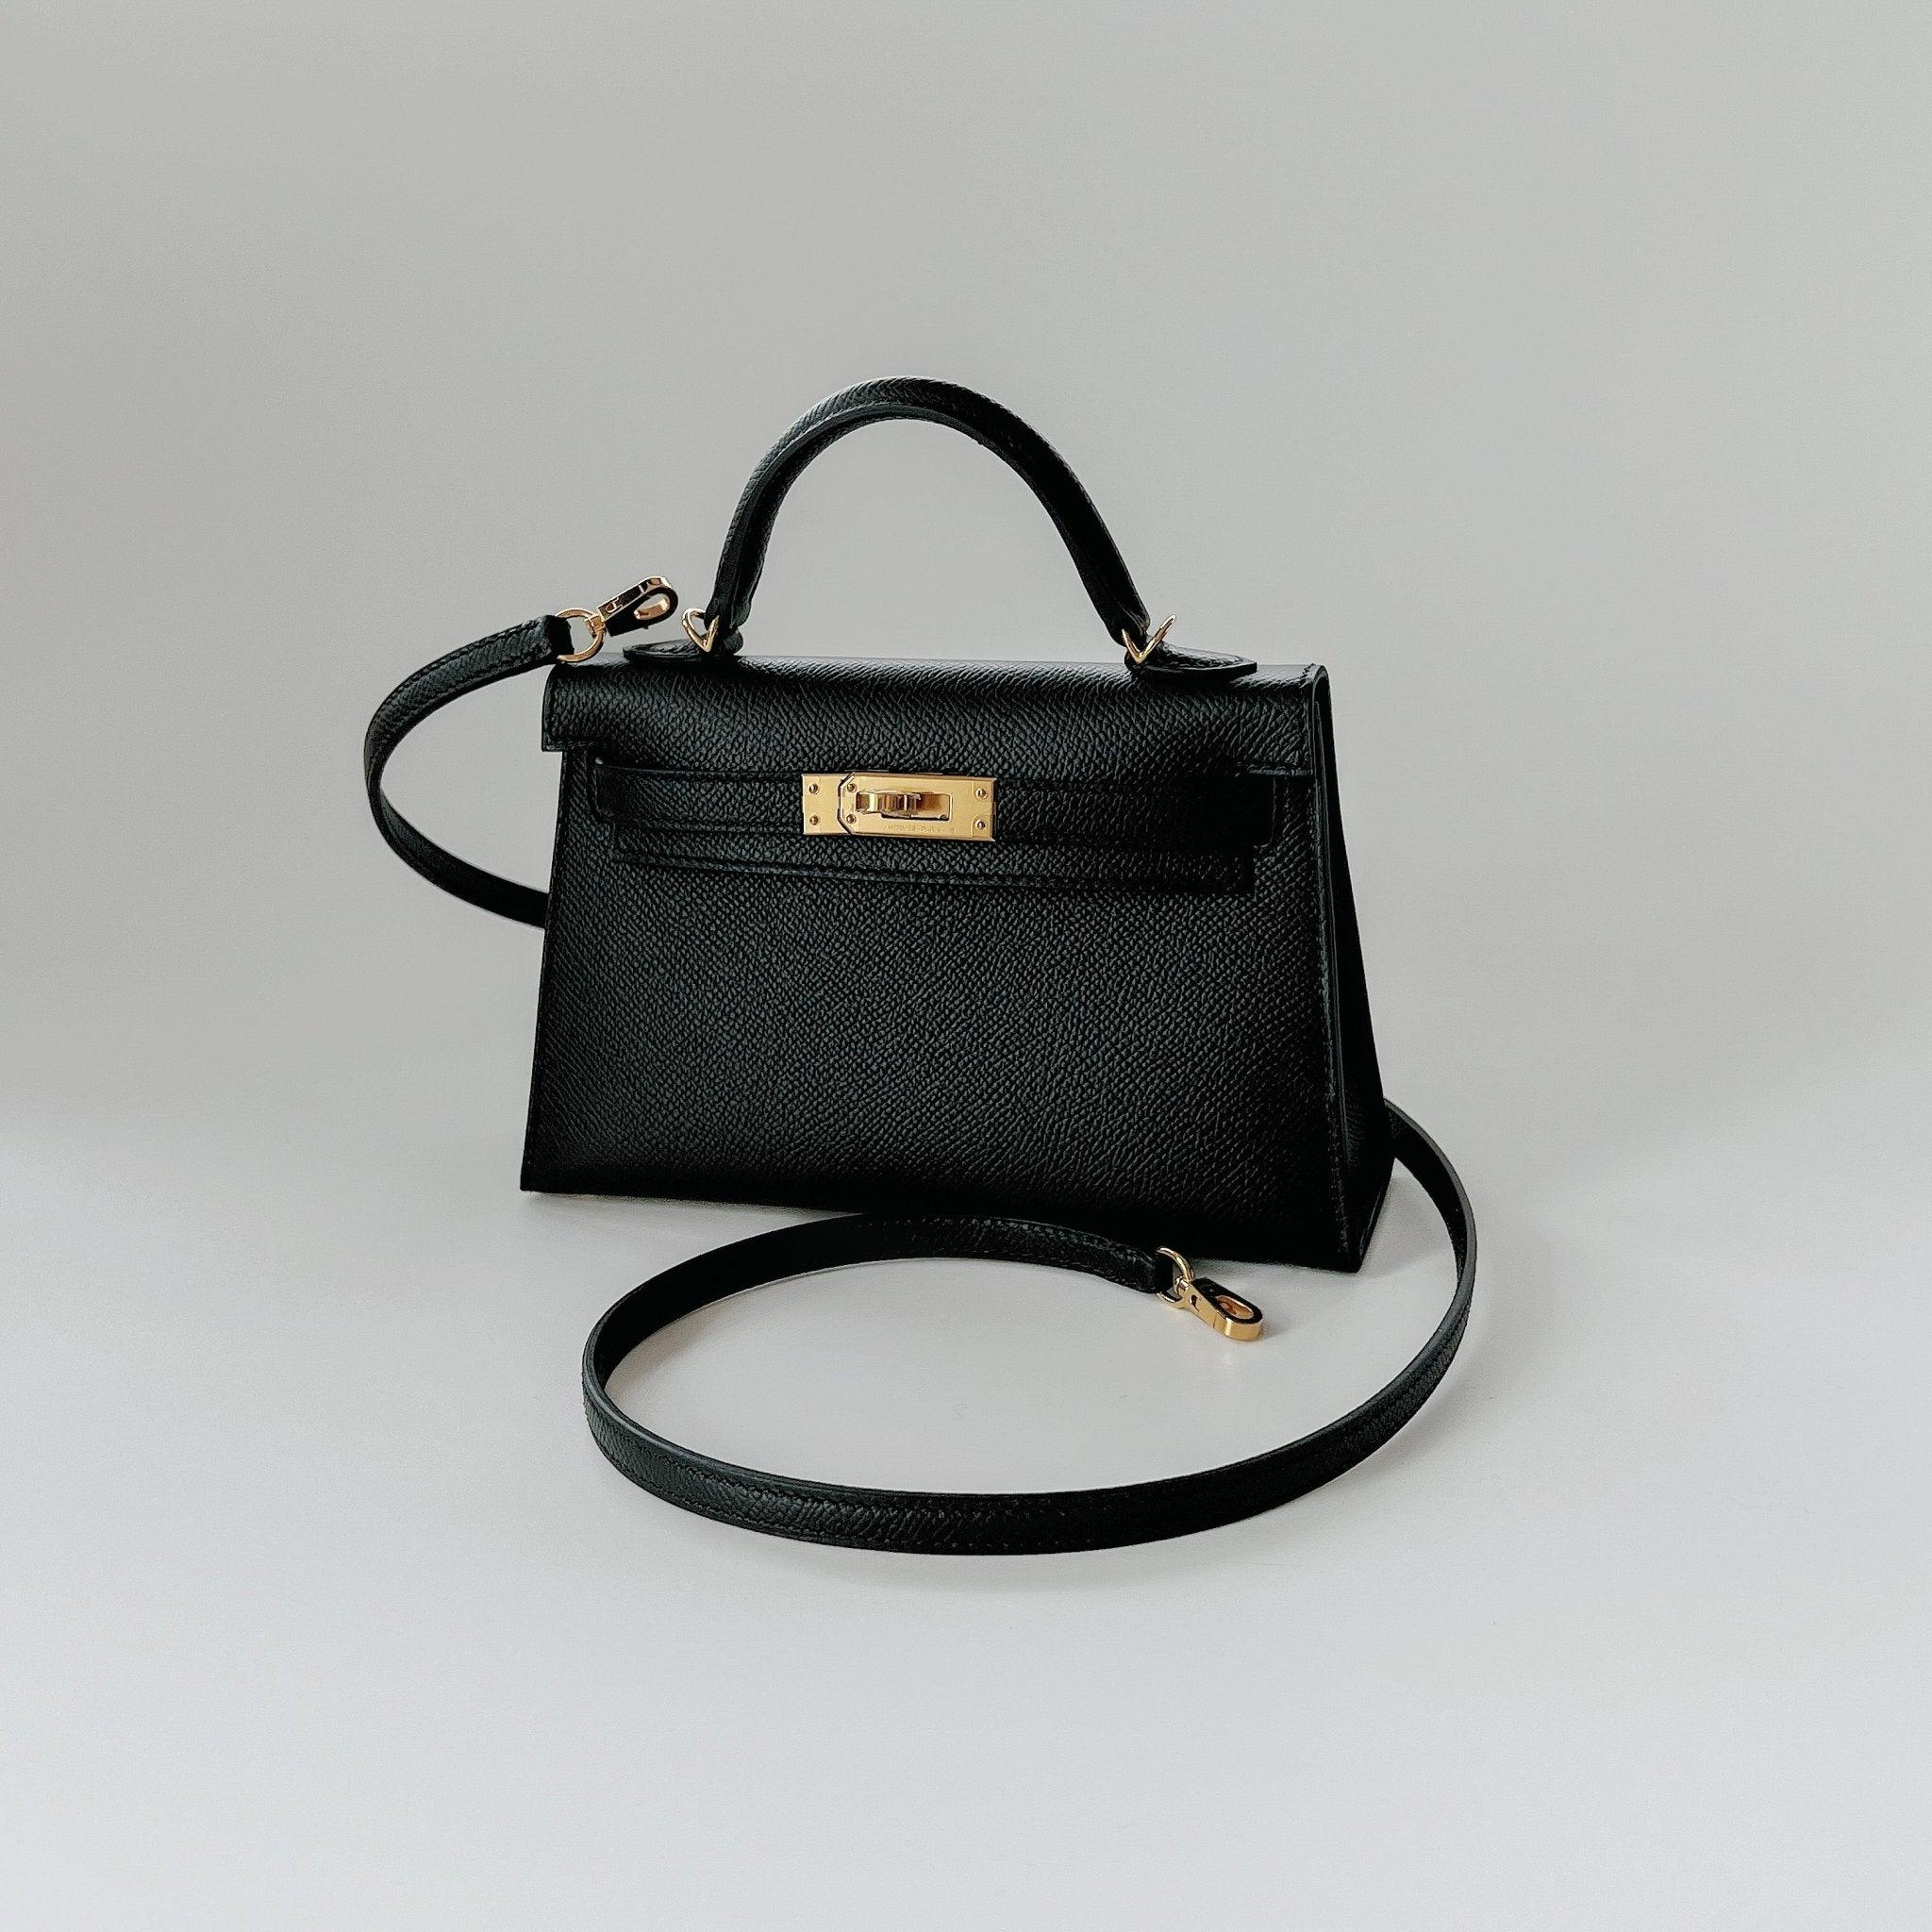 Hermes Mini Kelly II Sellier In Black Epsom Leather With Gold Hardware 2